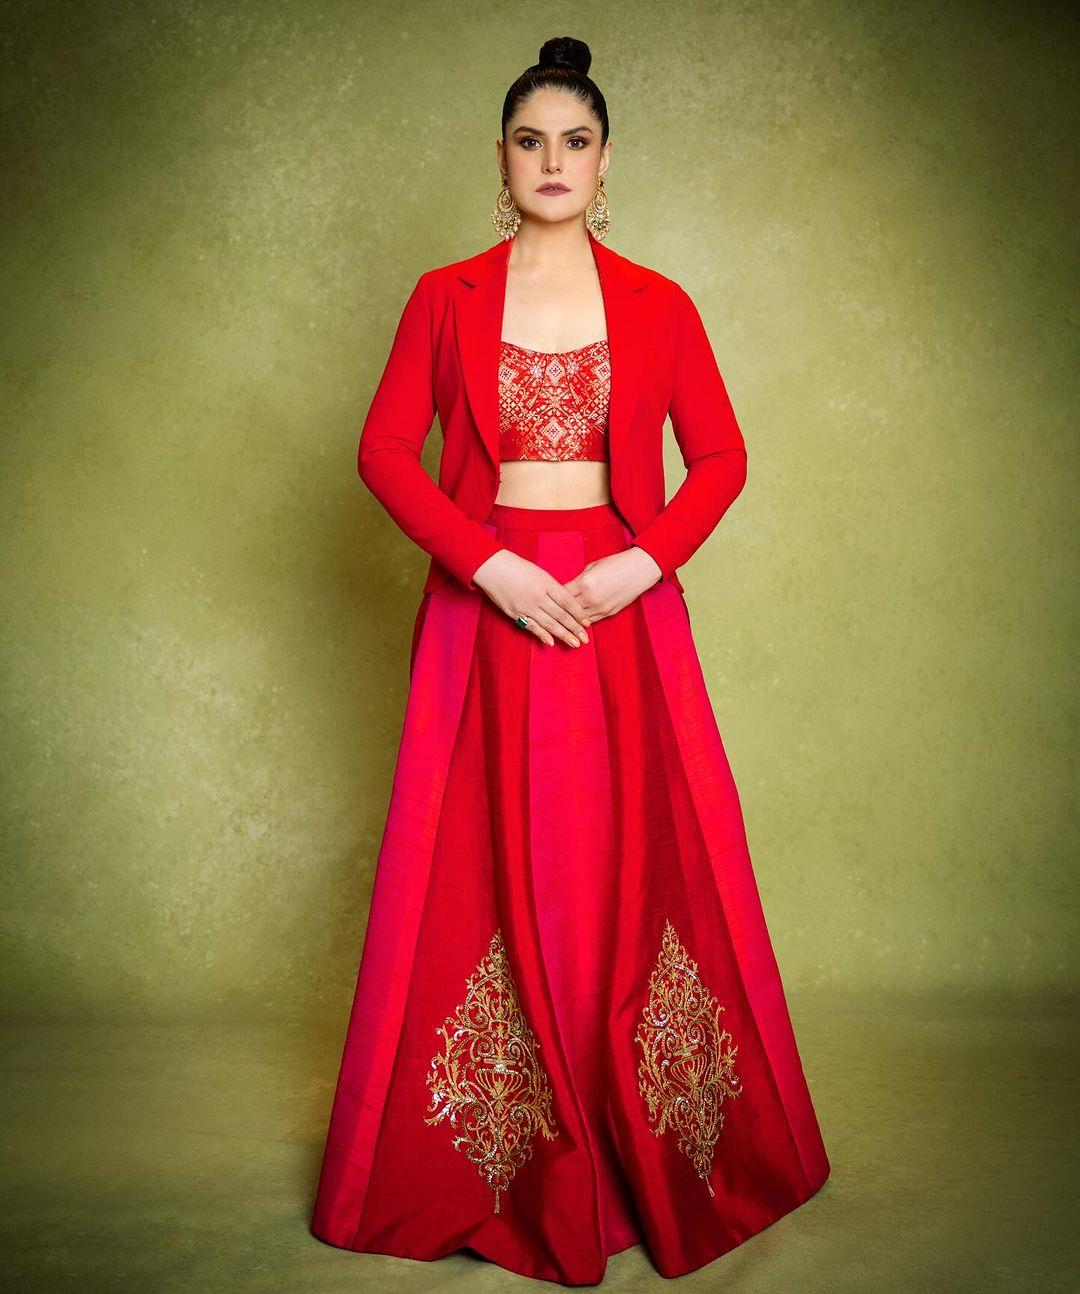 Learn from Zareen Khan how to slay in an indo-western outfit. In this look, she wore a red lehenga with golden embroidery and paired it with a matching printed blouse